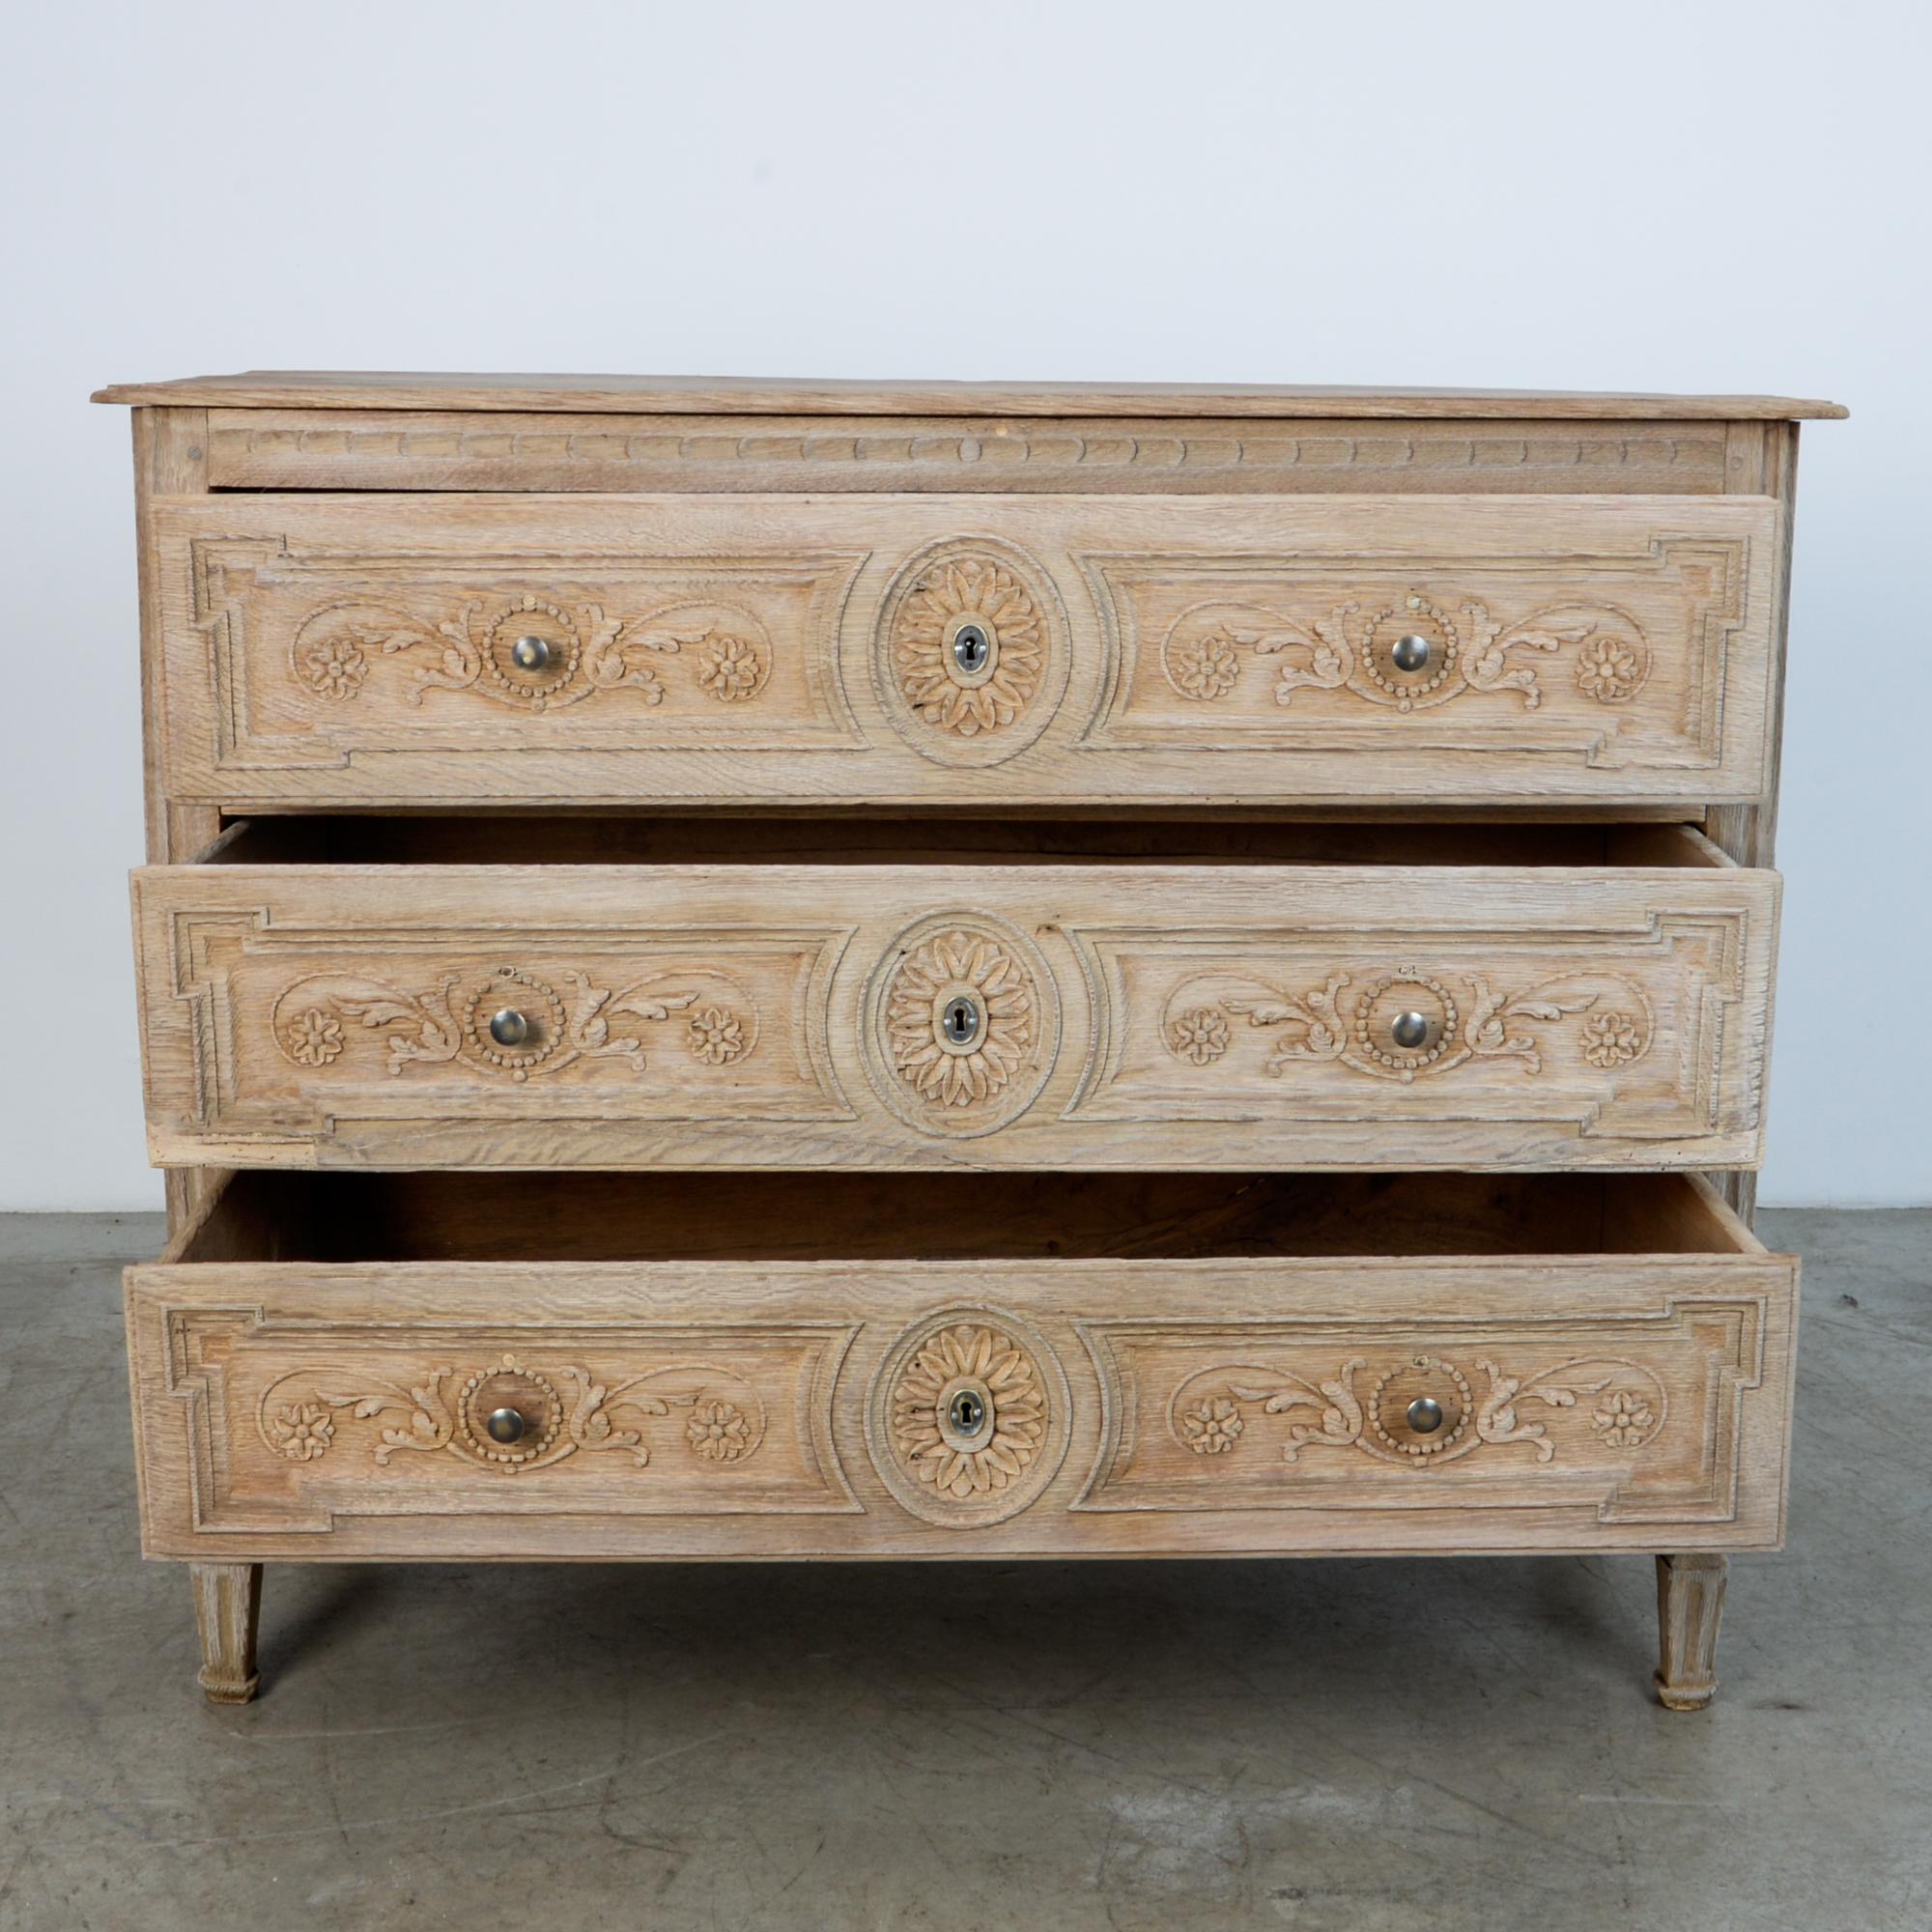 A Louis Philippe style chest of drawers, circa mid-19th century France. Great flower ornament emphasises the original brass locking hardware sealing spacious deep drawers. Underlined by distinctive geometric ornamental apron.

A celebration of